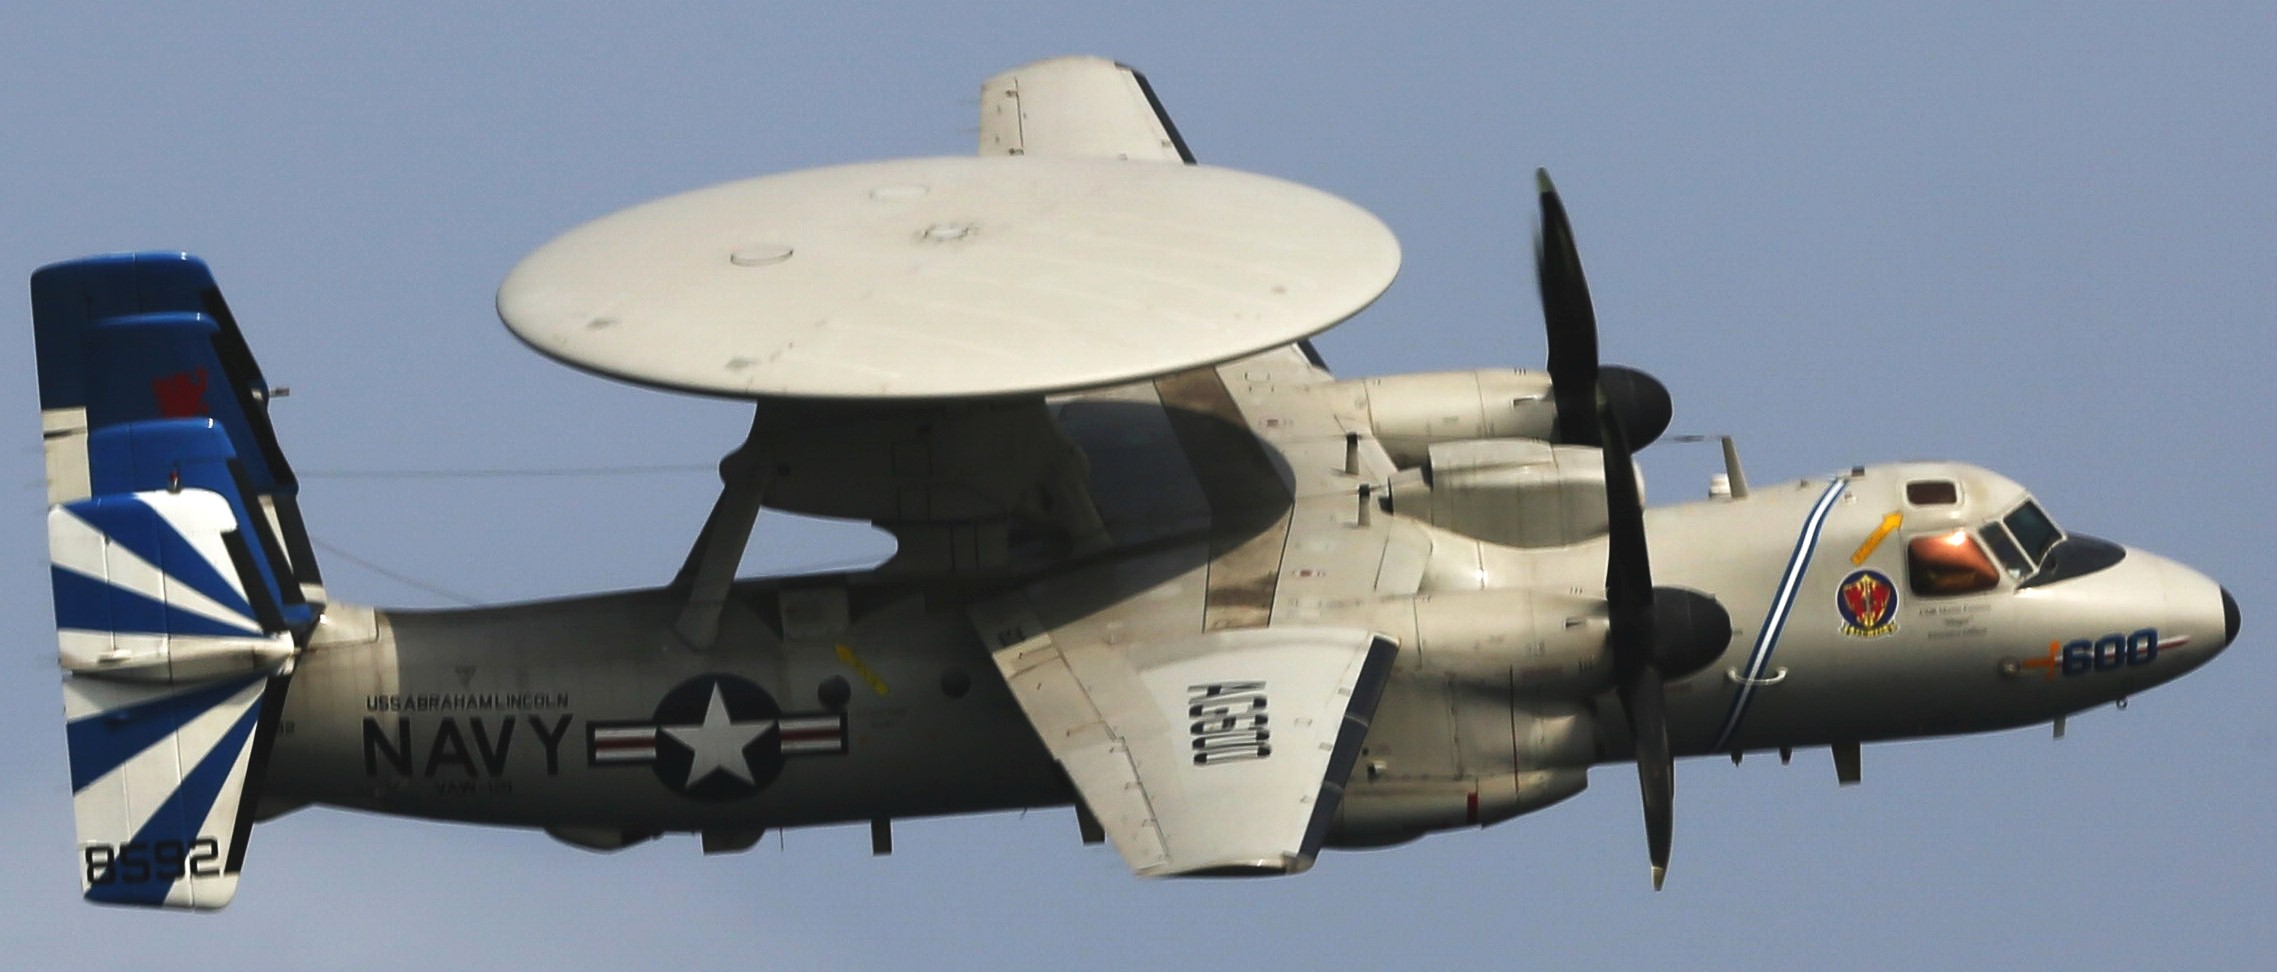 vaw-121 bluetails airborne command and control squadron us navy e-2d advanced hawkeye cvw-7 uss abraham lincoln cvn-72 73